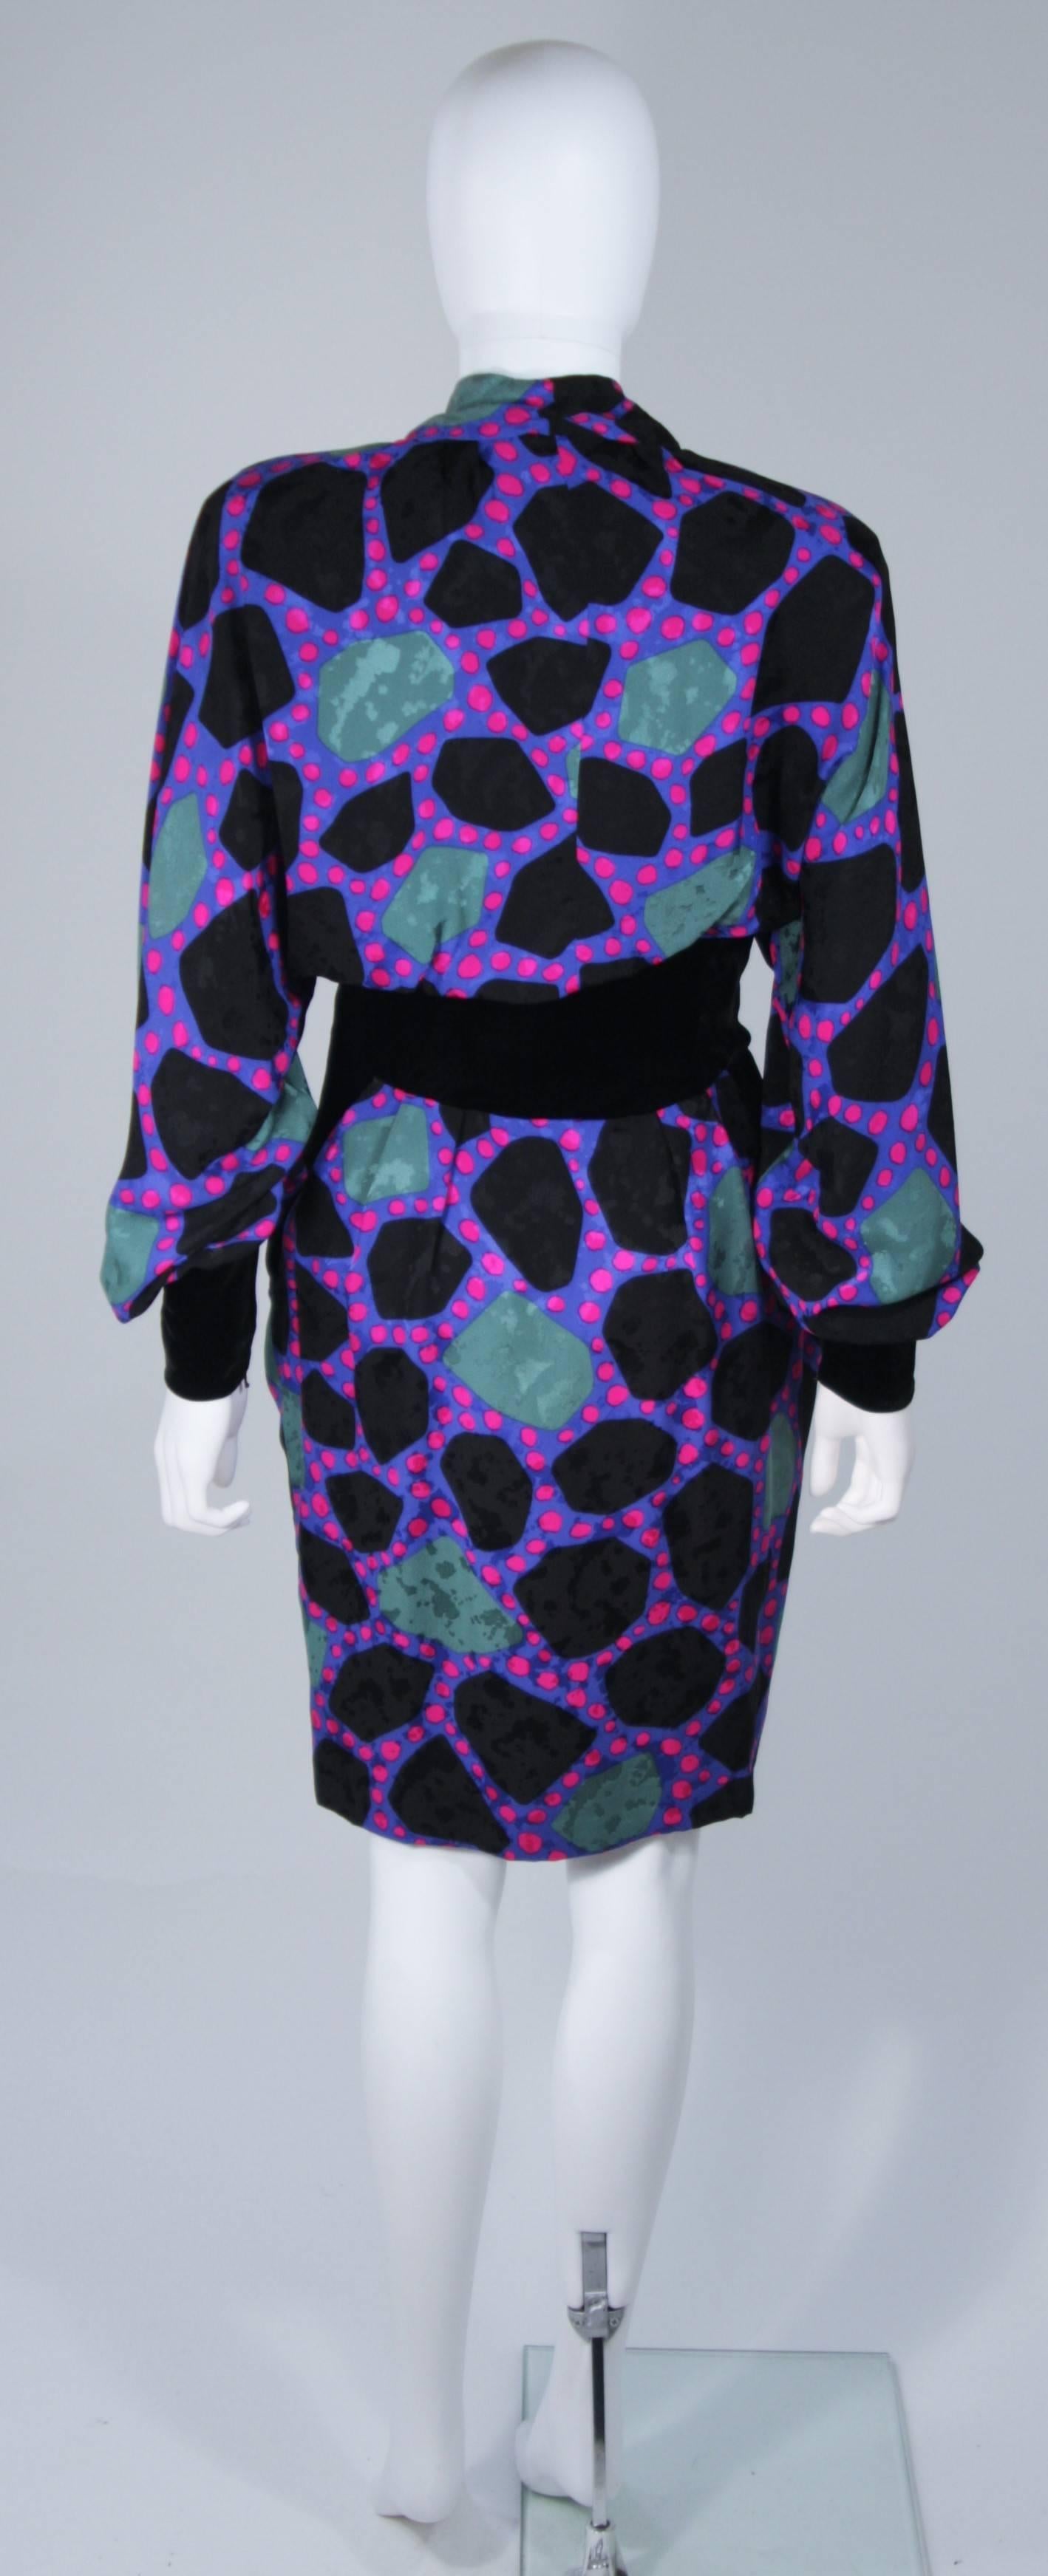 JACQUELINE DE RIBES Circa 1990s Abstract Silk Printed Dress with Velvet Size 6-8 For Sale 4